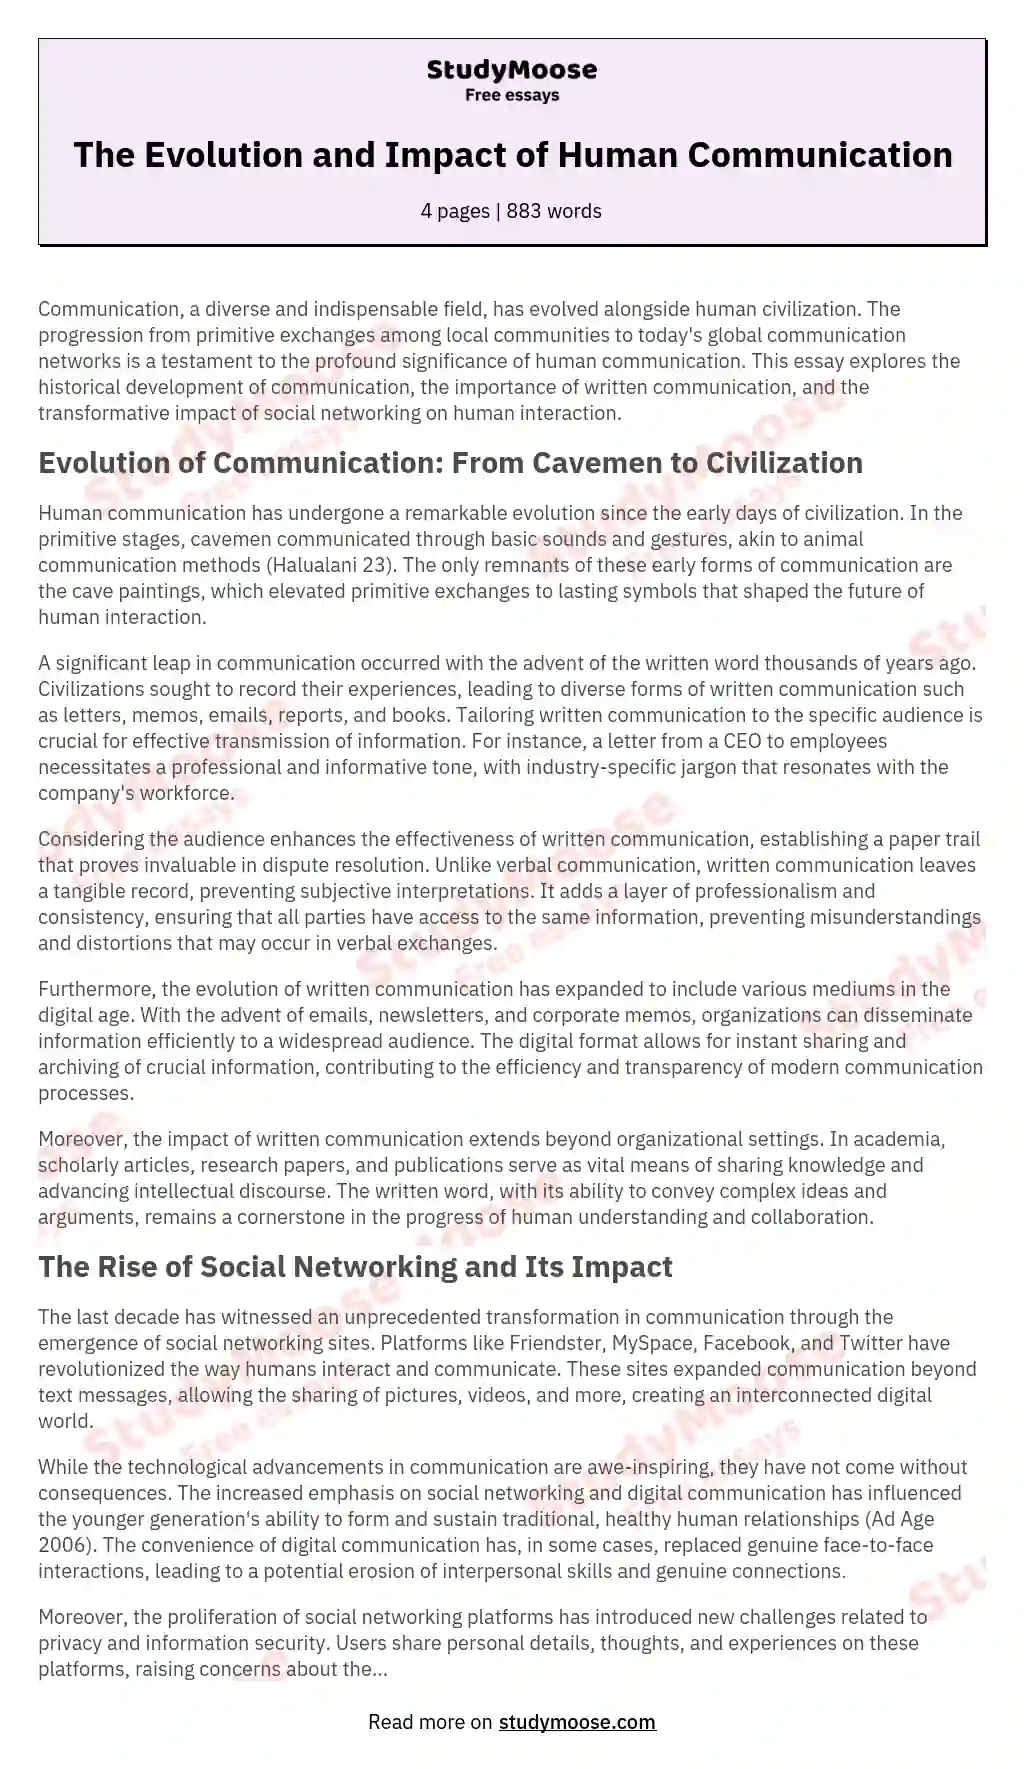 The Evolution and Impact of Human Communication essay